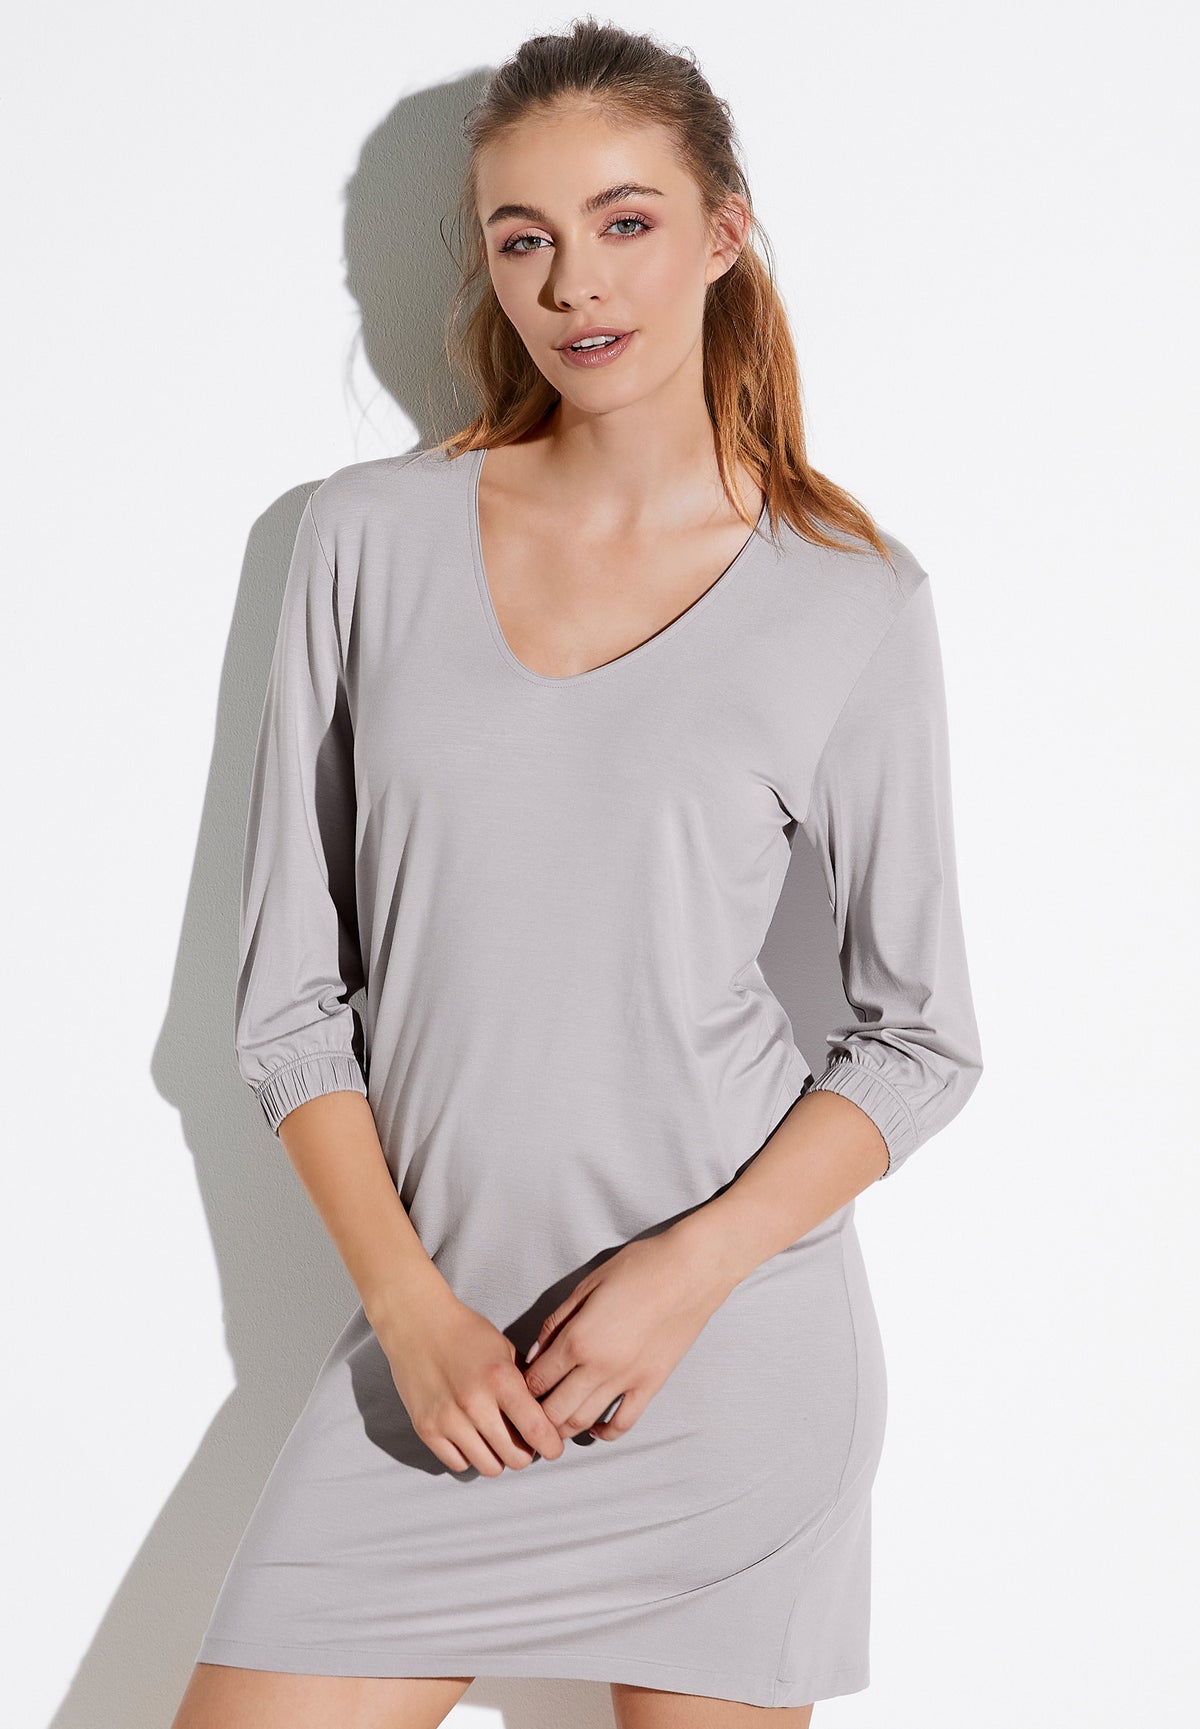 Pureness | Robe courte manches 3/4 - stone grey